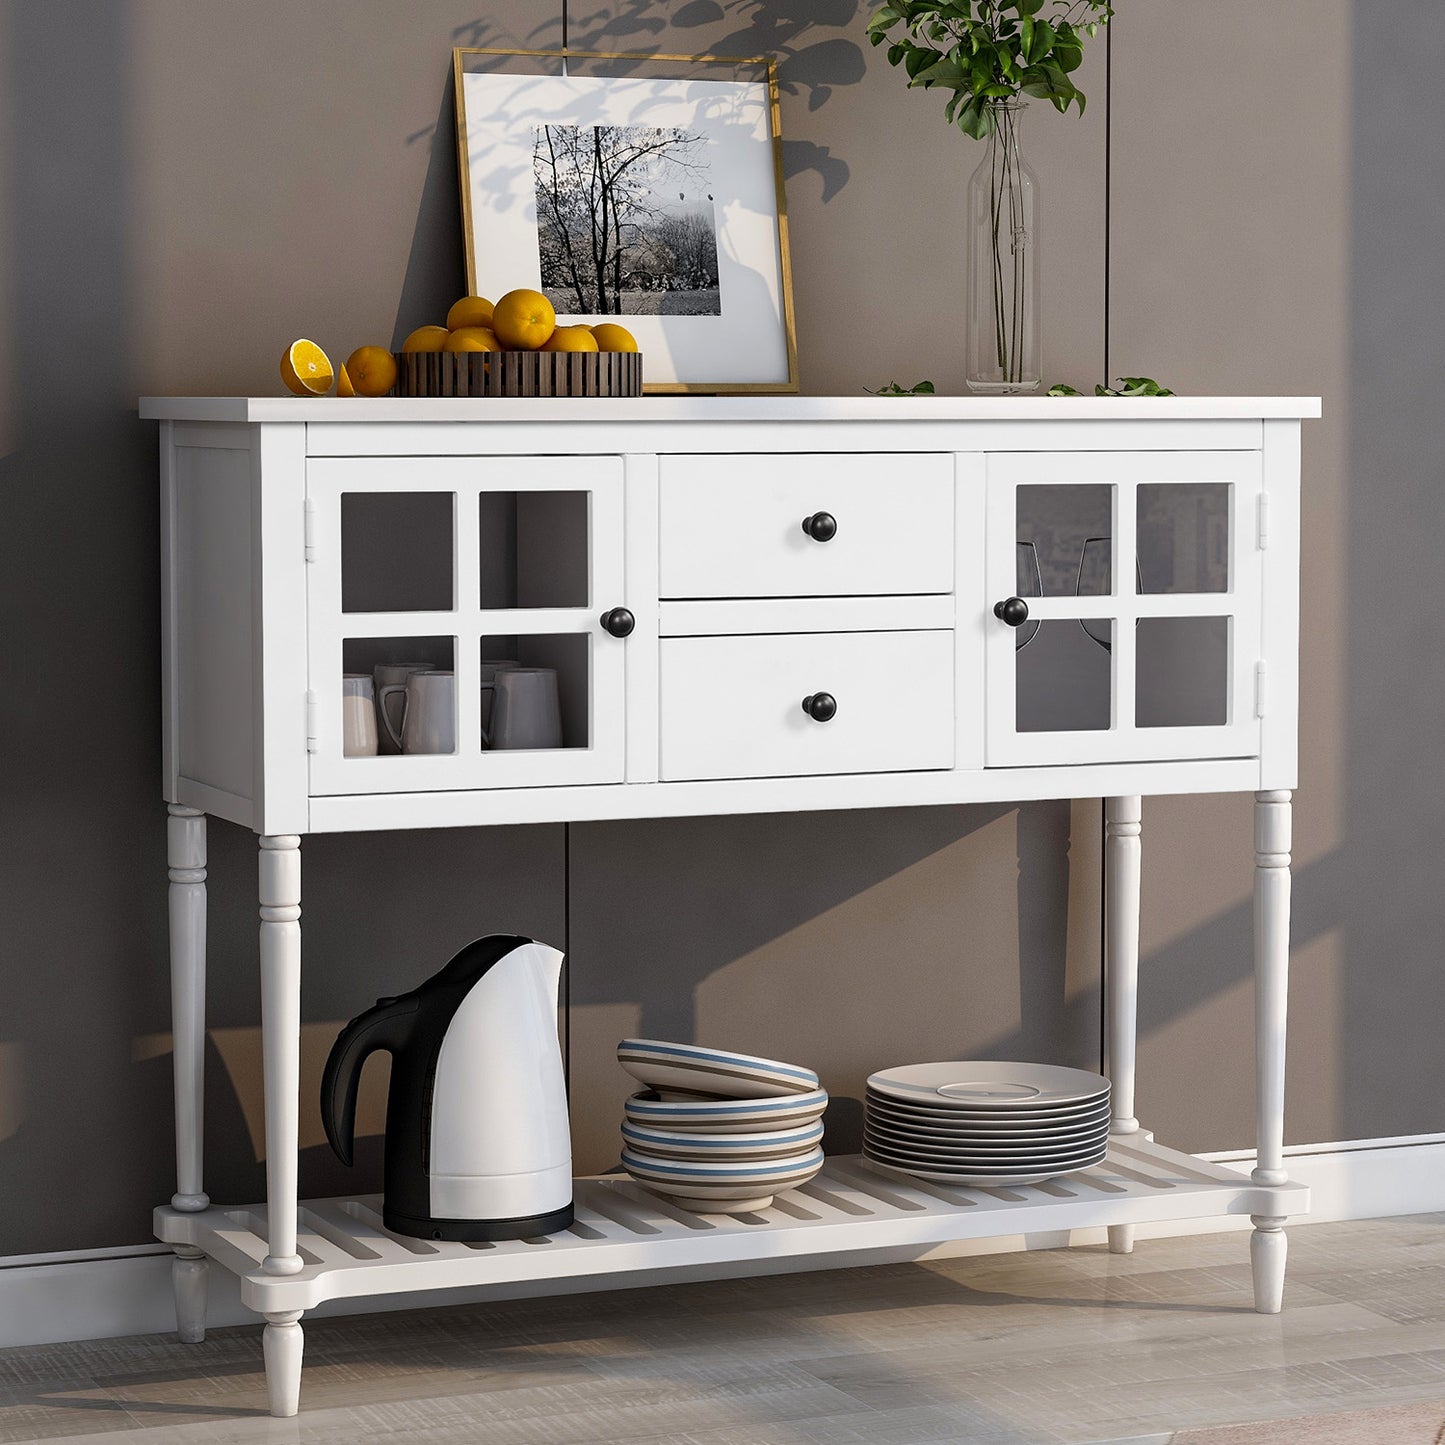 TREXM Farmhouse Style Sideboard Console Table with Bottom Shelf